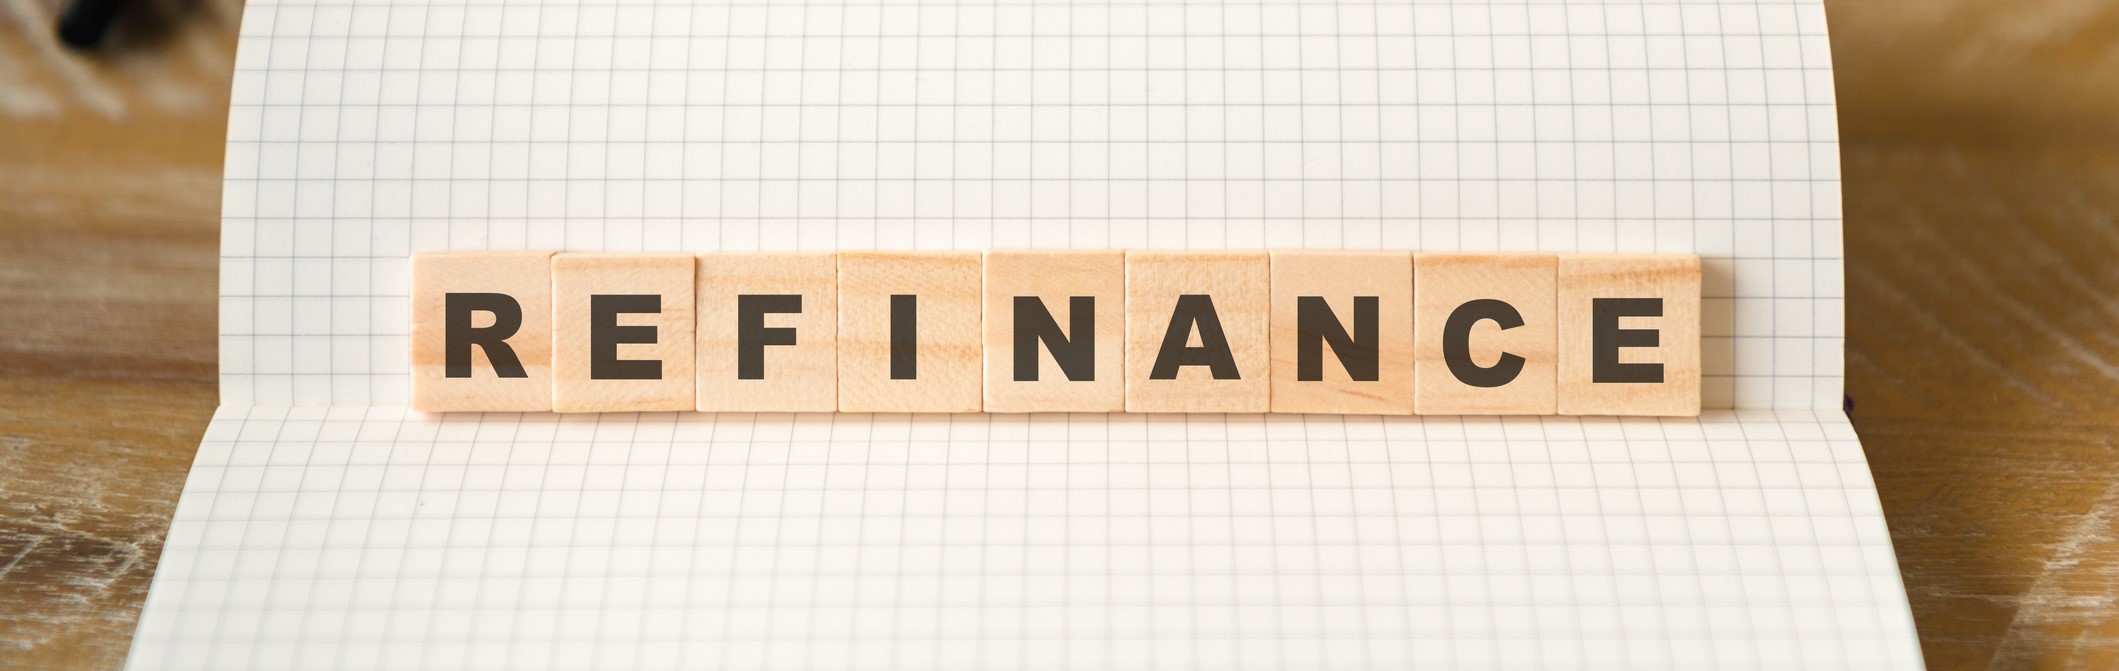 Things to Consider Before You Refinance